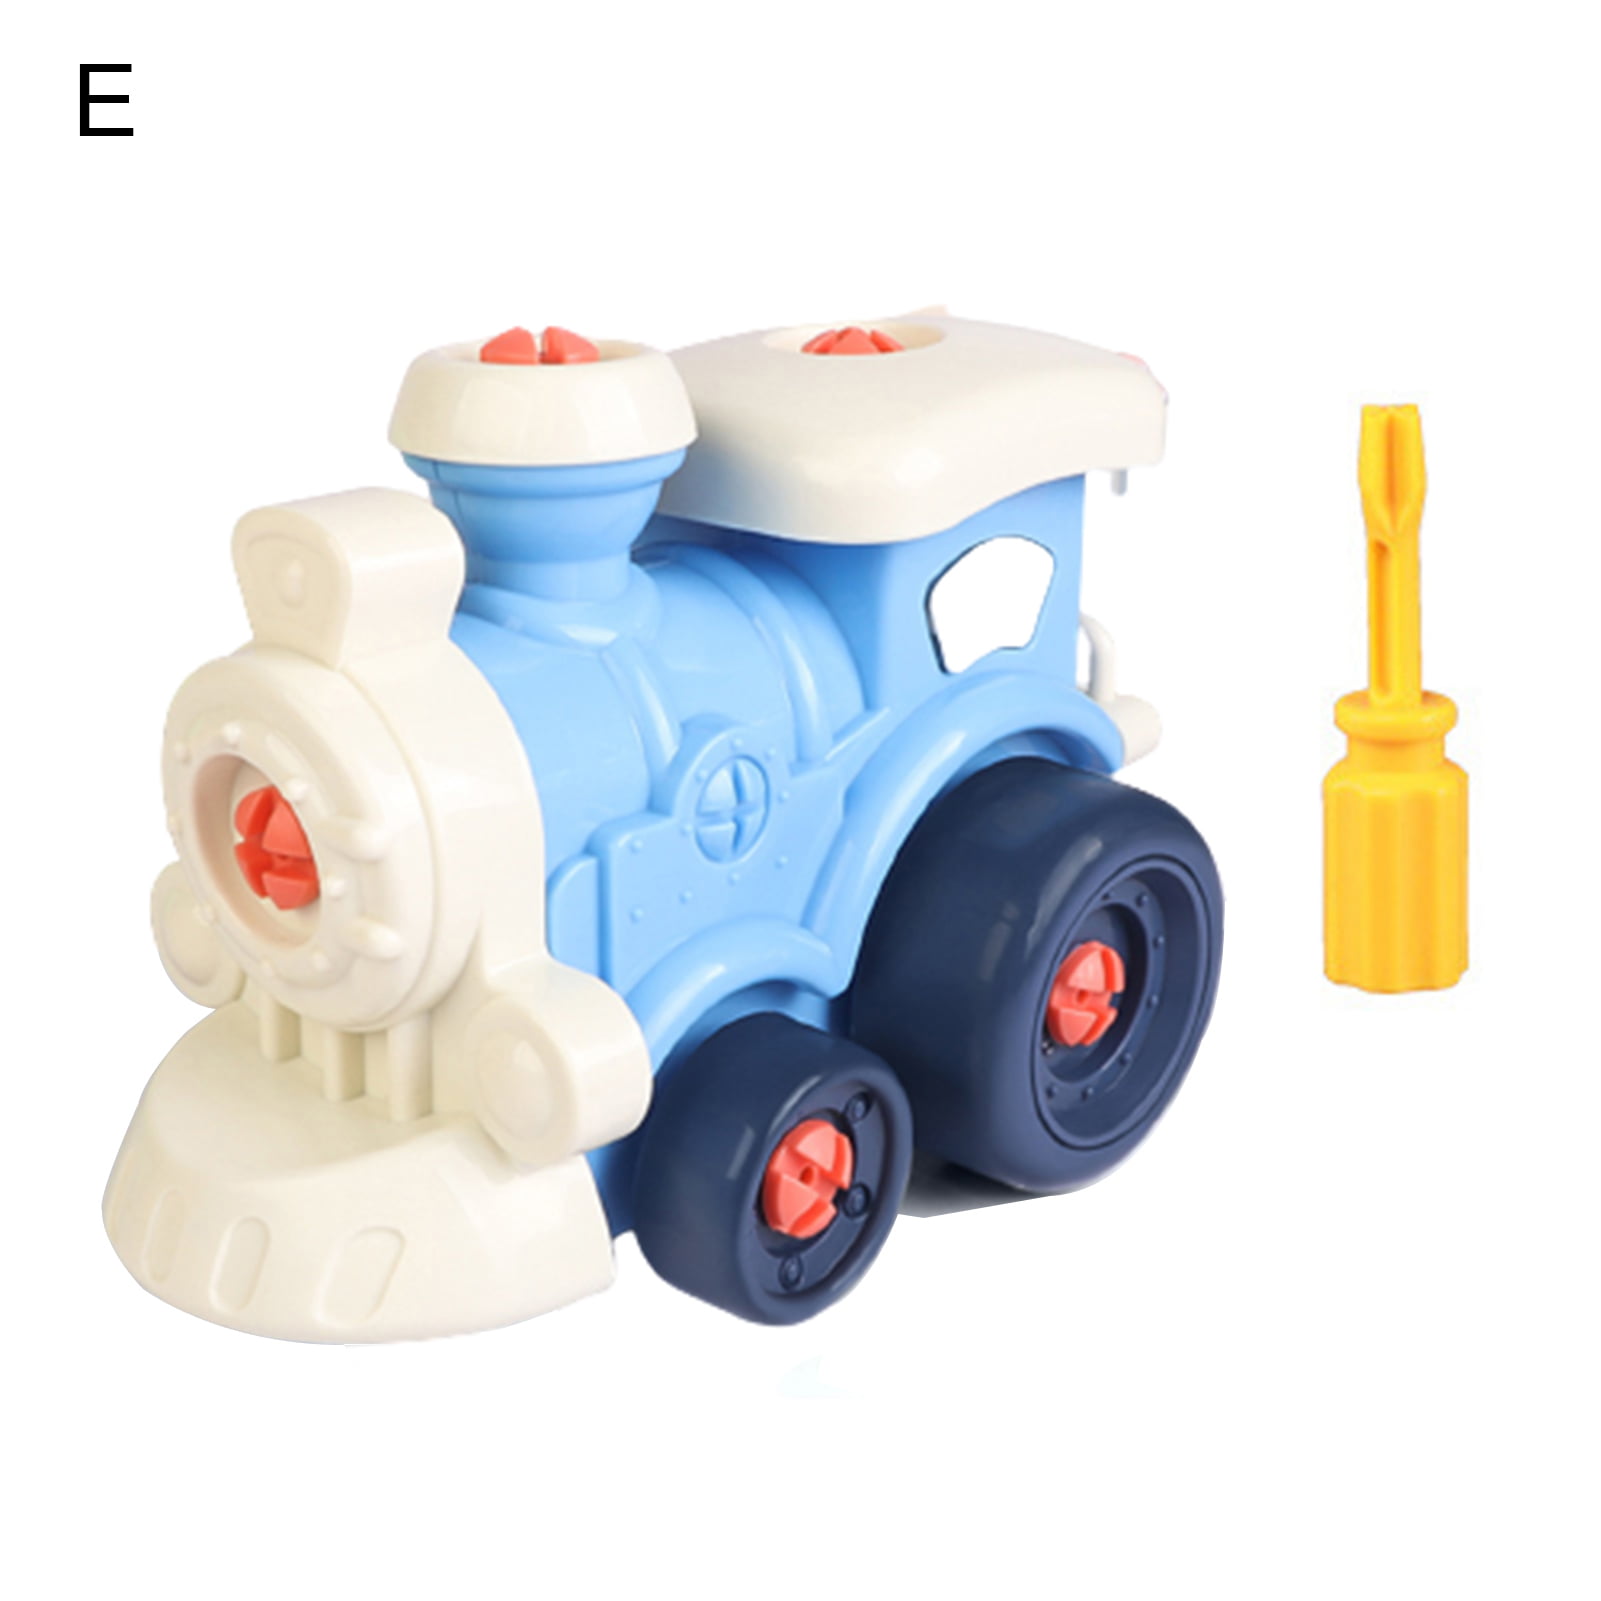 Building Details about   New Playtek Little Engineer Vehicle Series Red Train Toys Children 3